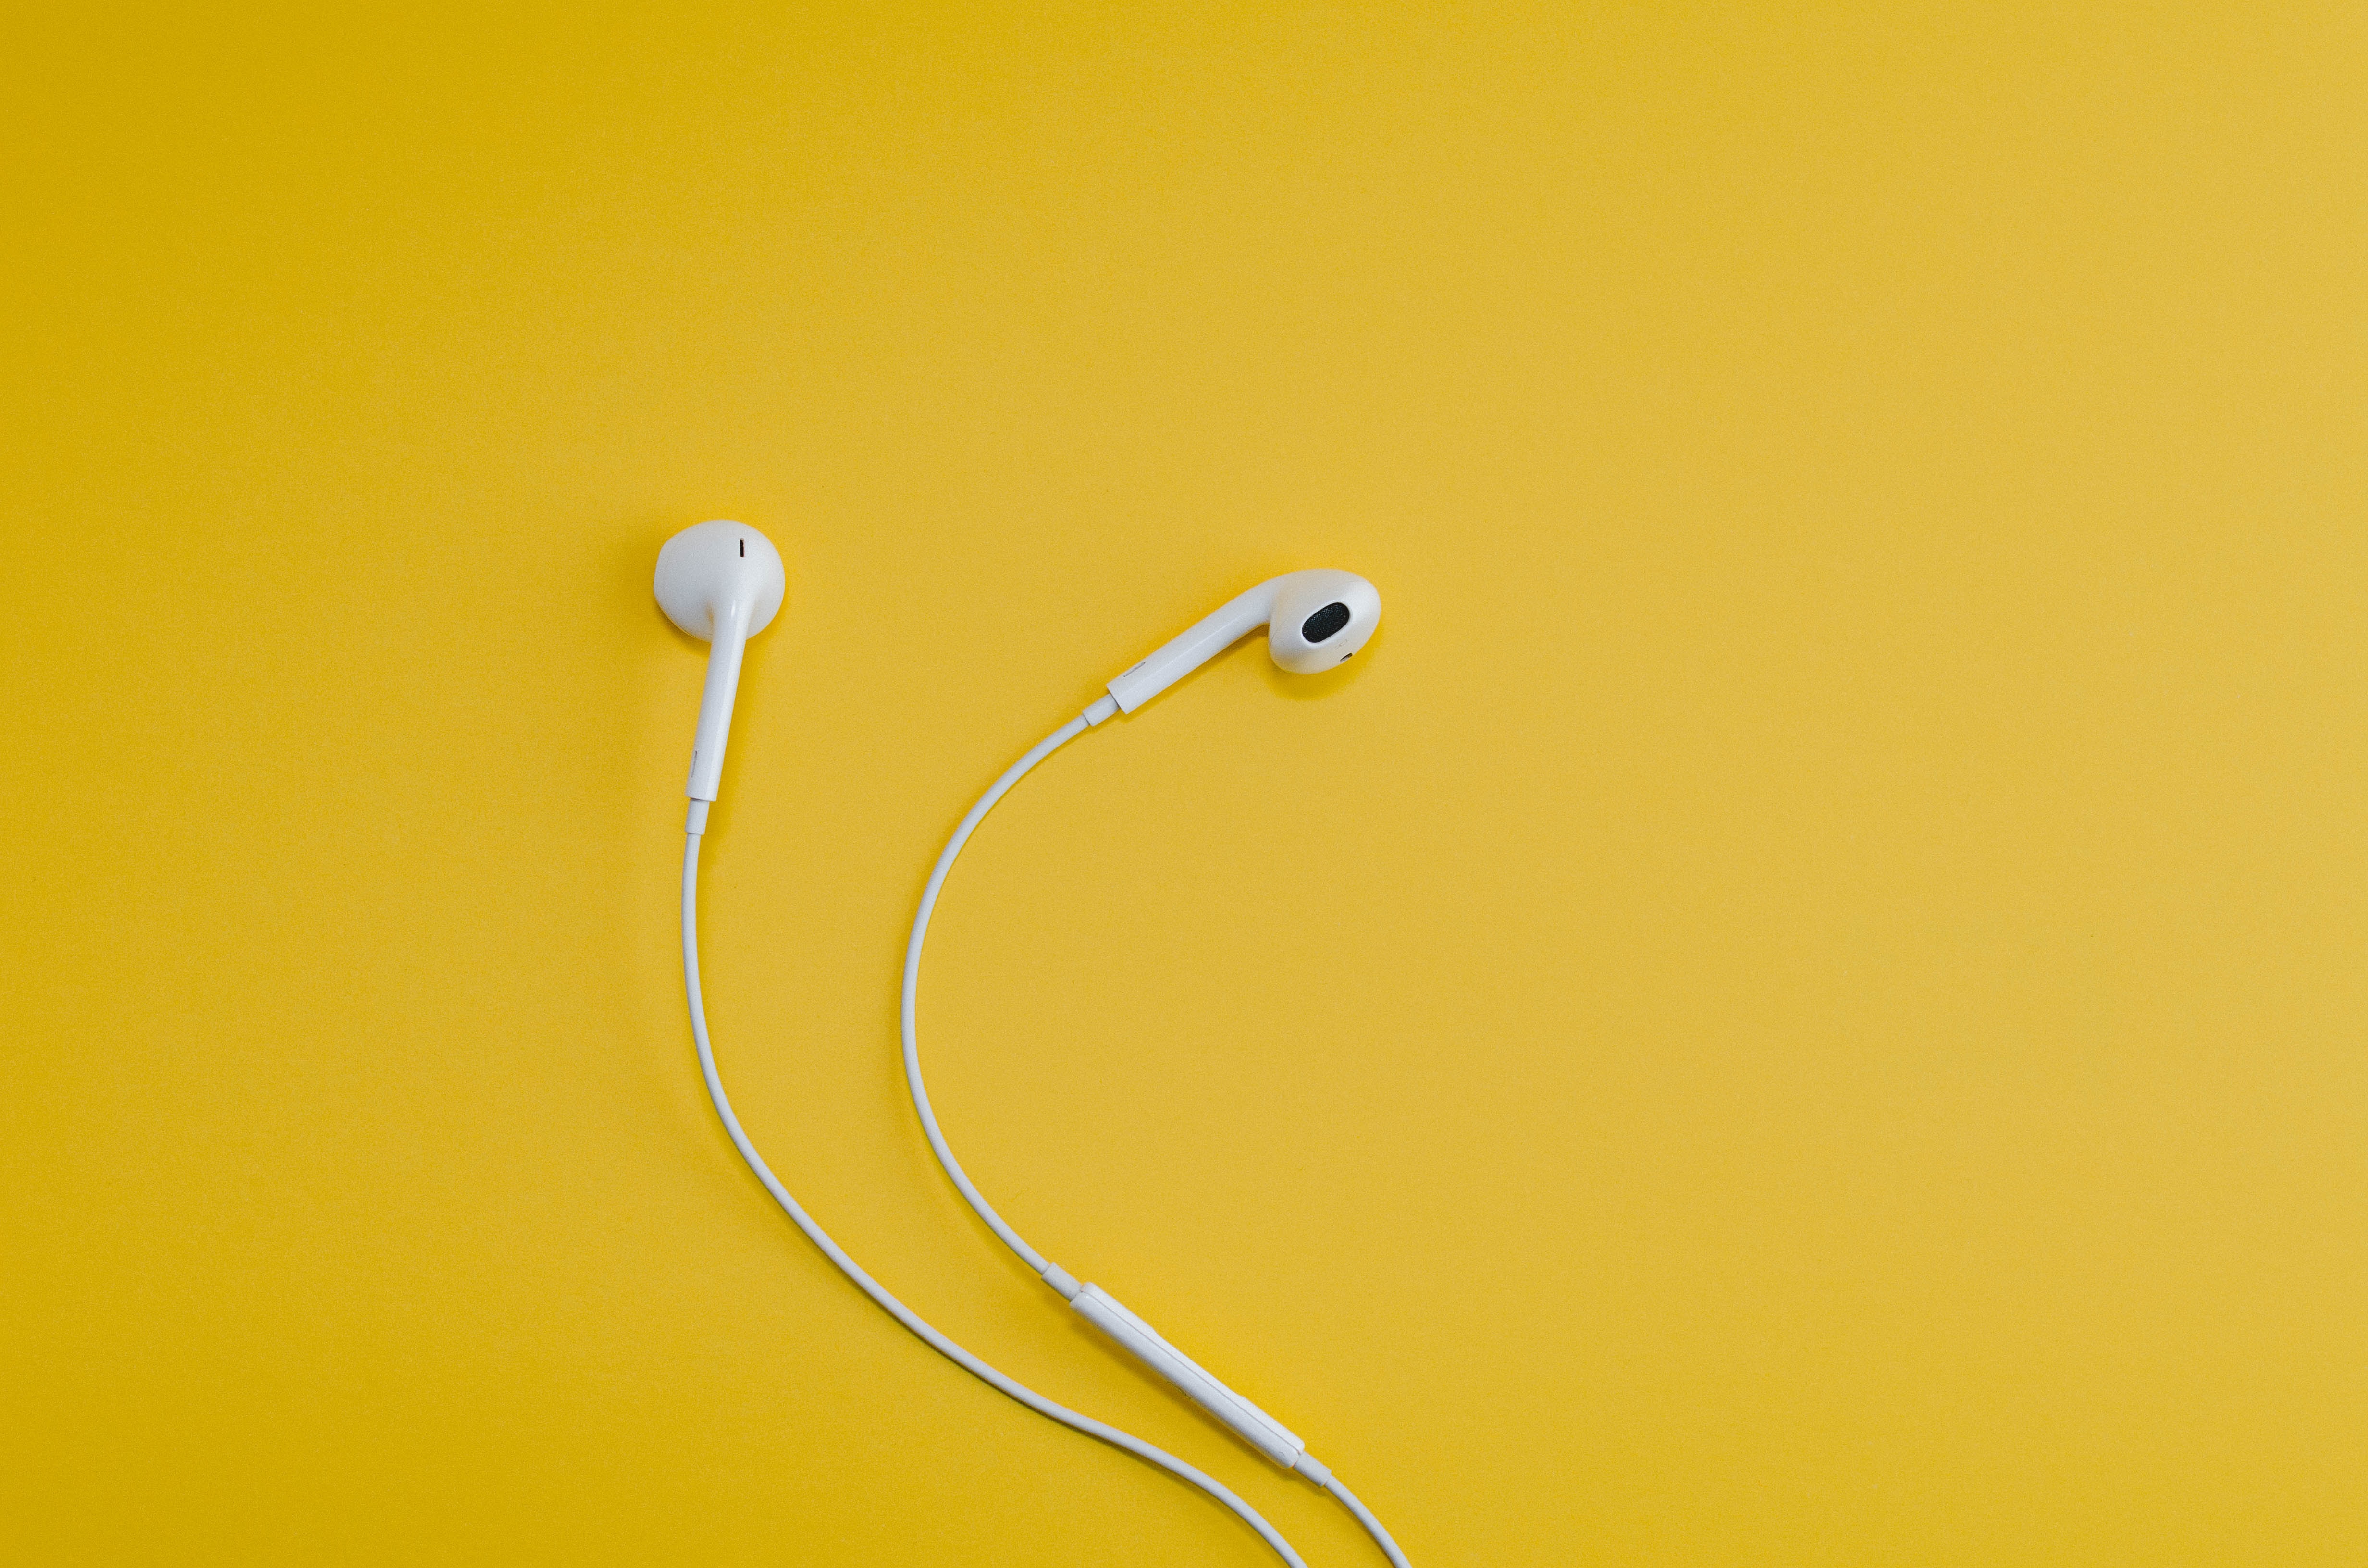 White earbuds on a yellow background